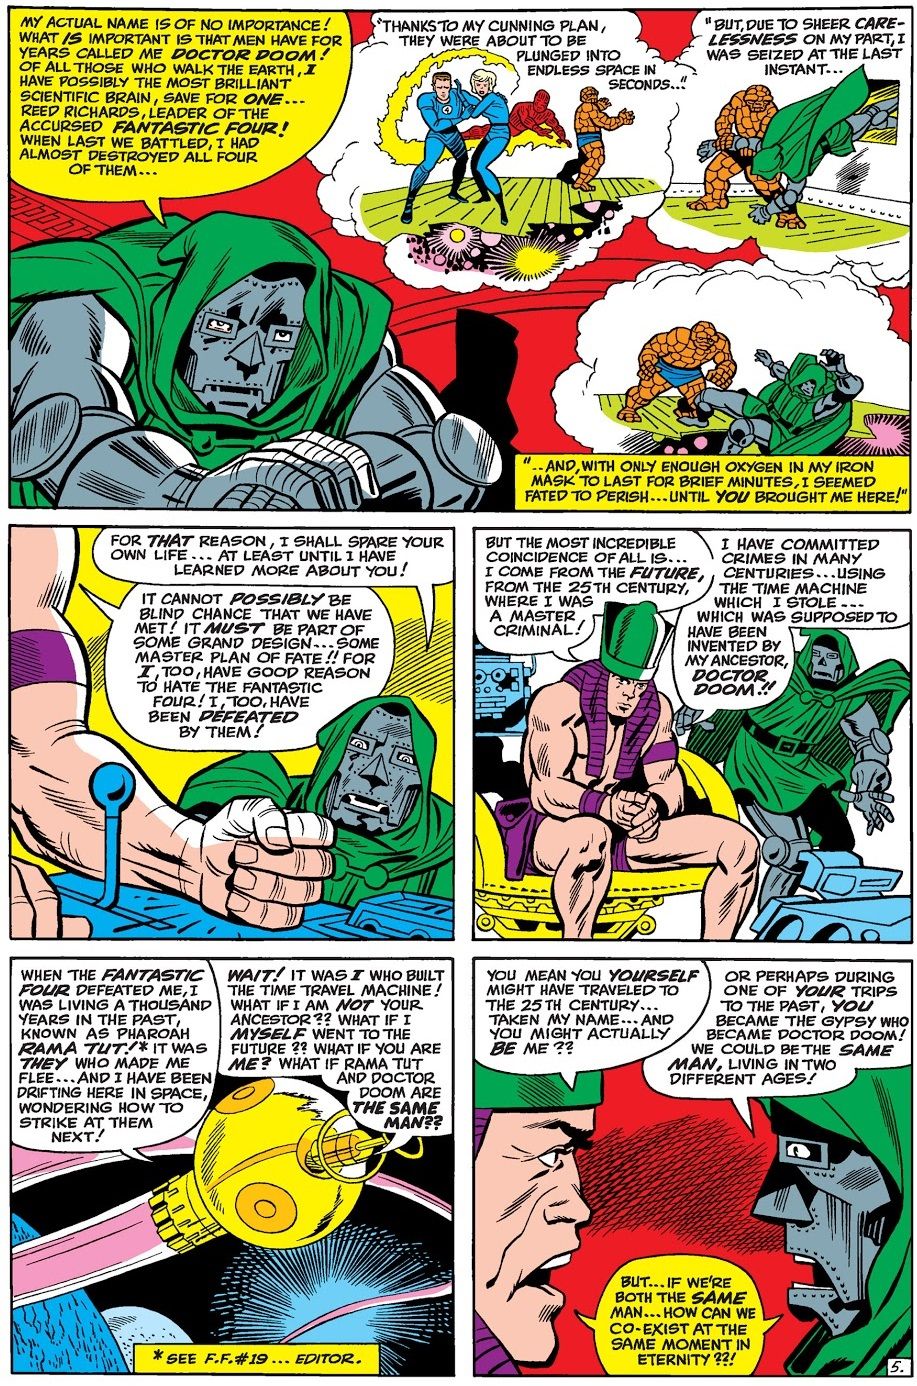 Doctor Doom and Rama-Tut talk about the possibility that they are the same person